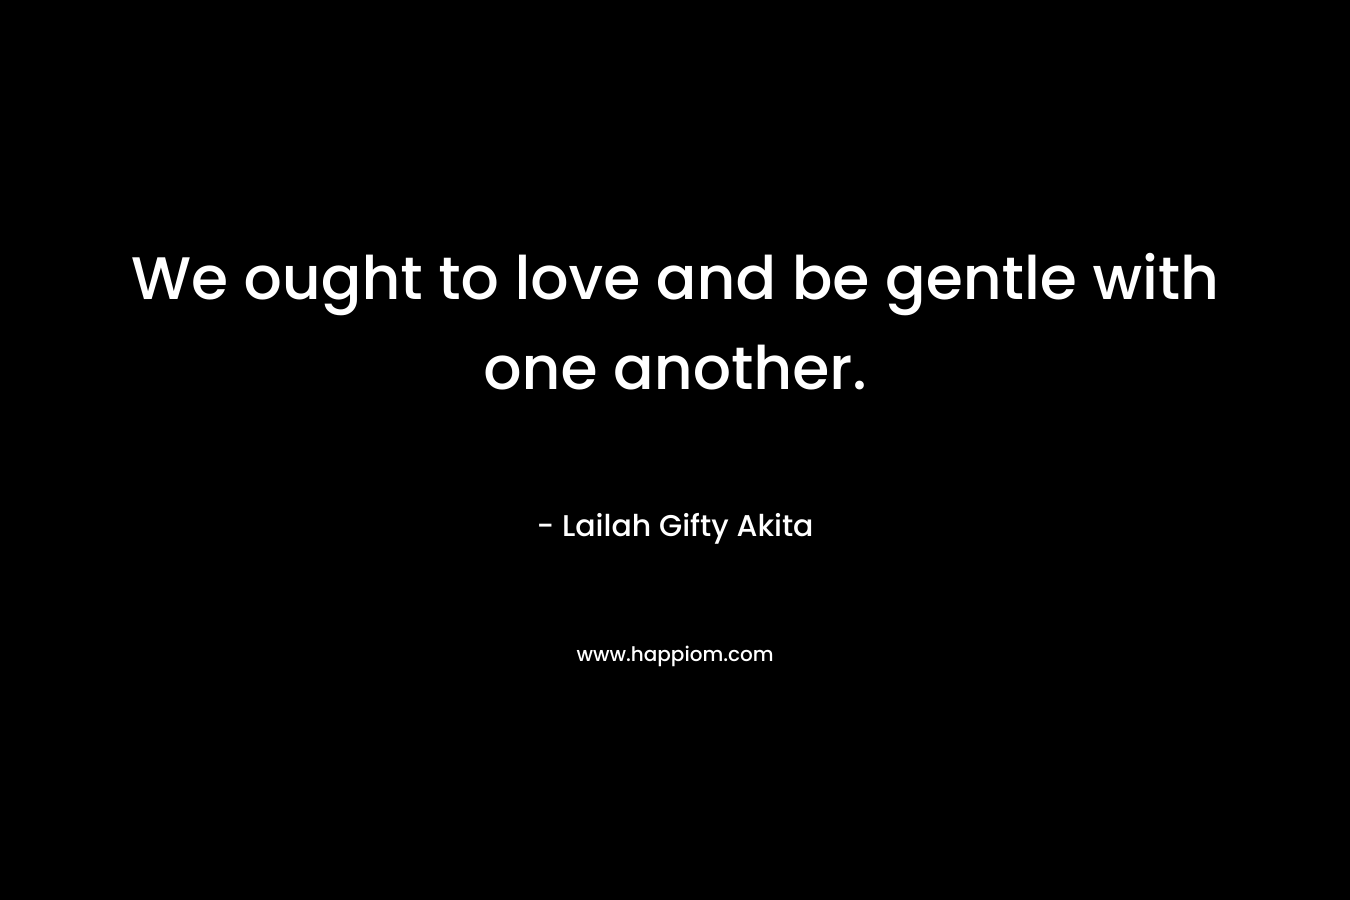 We ought to love and be gentle with one another.